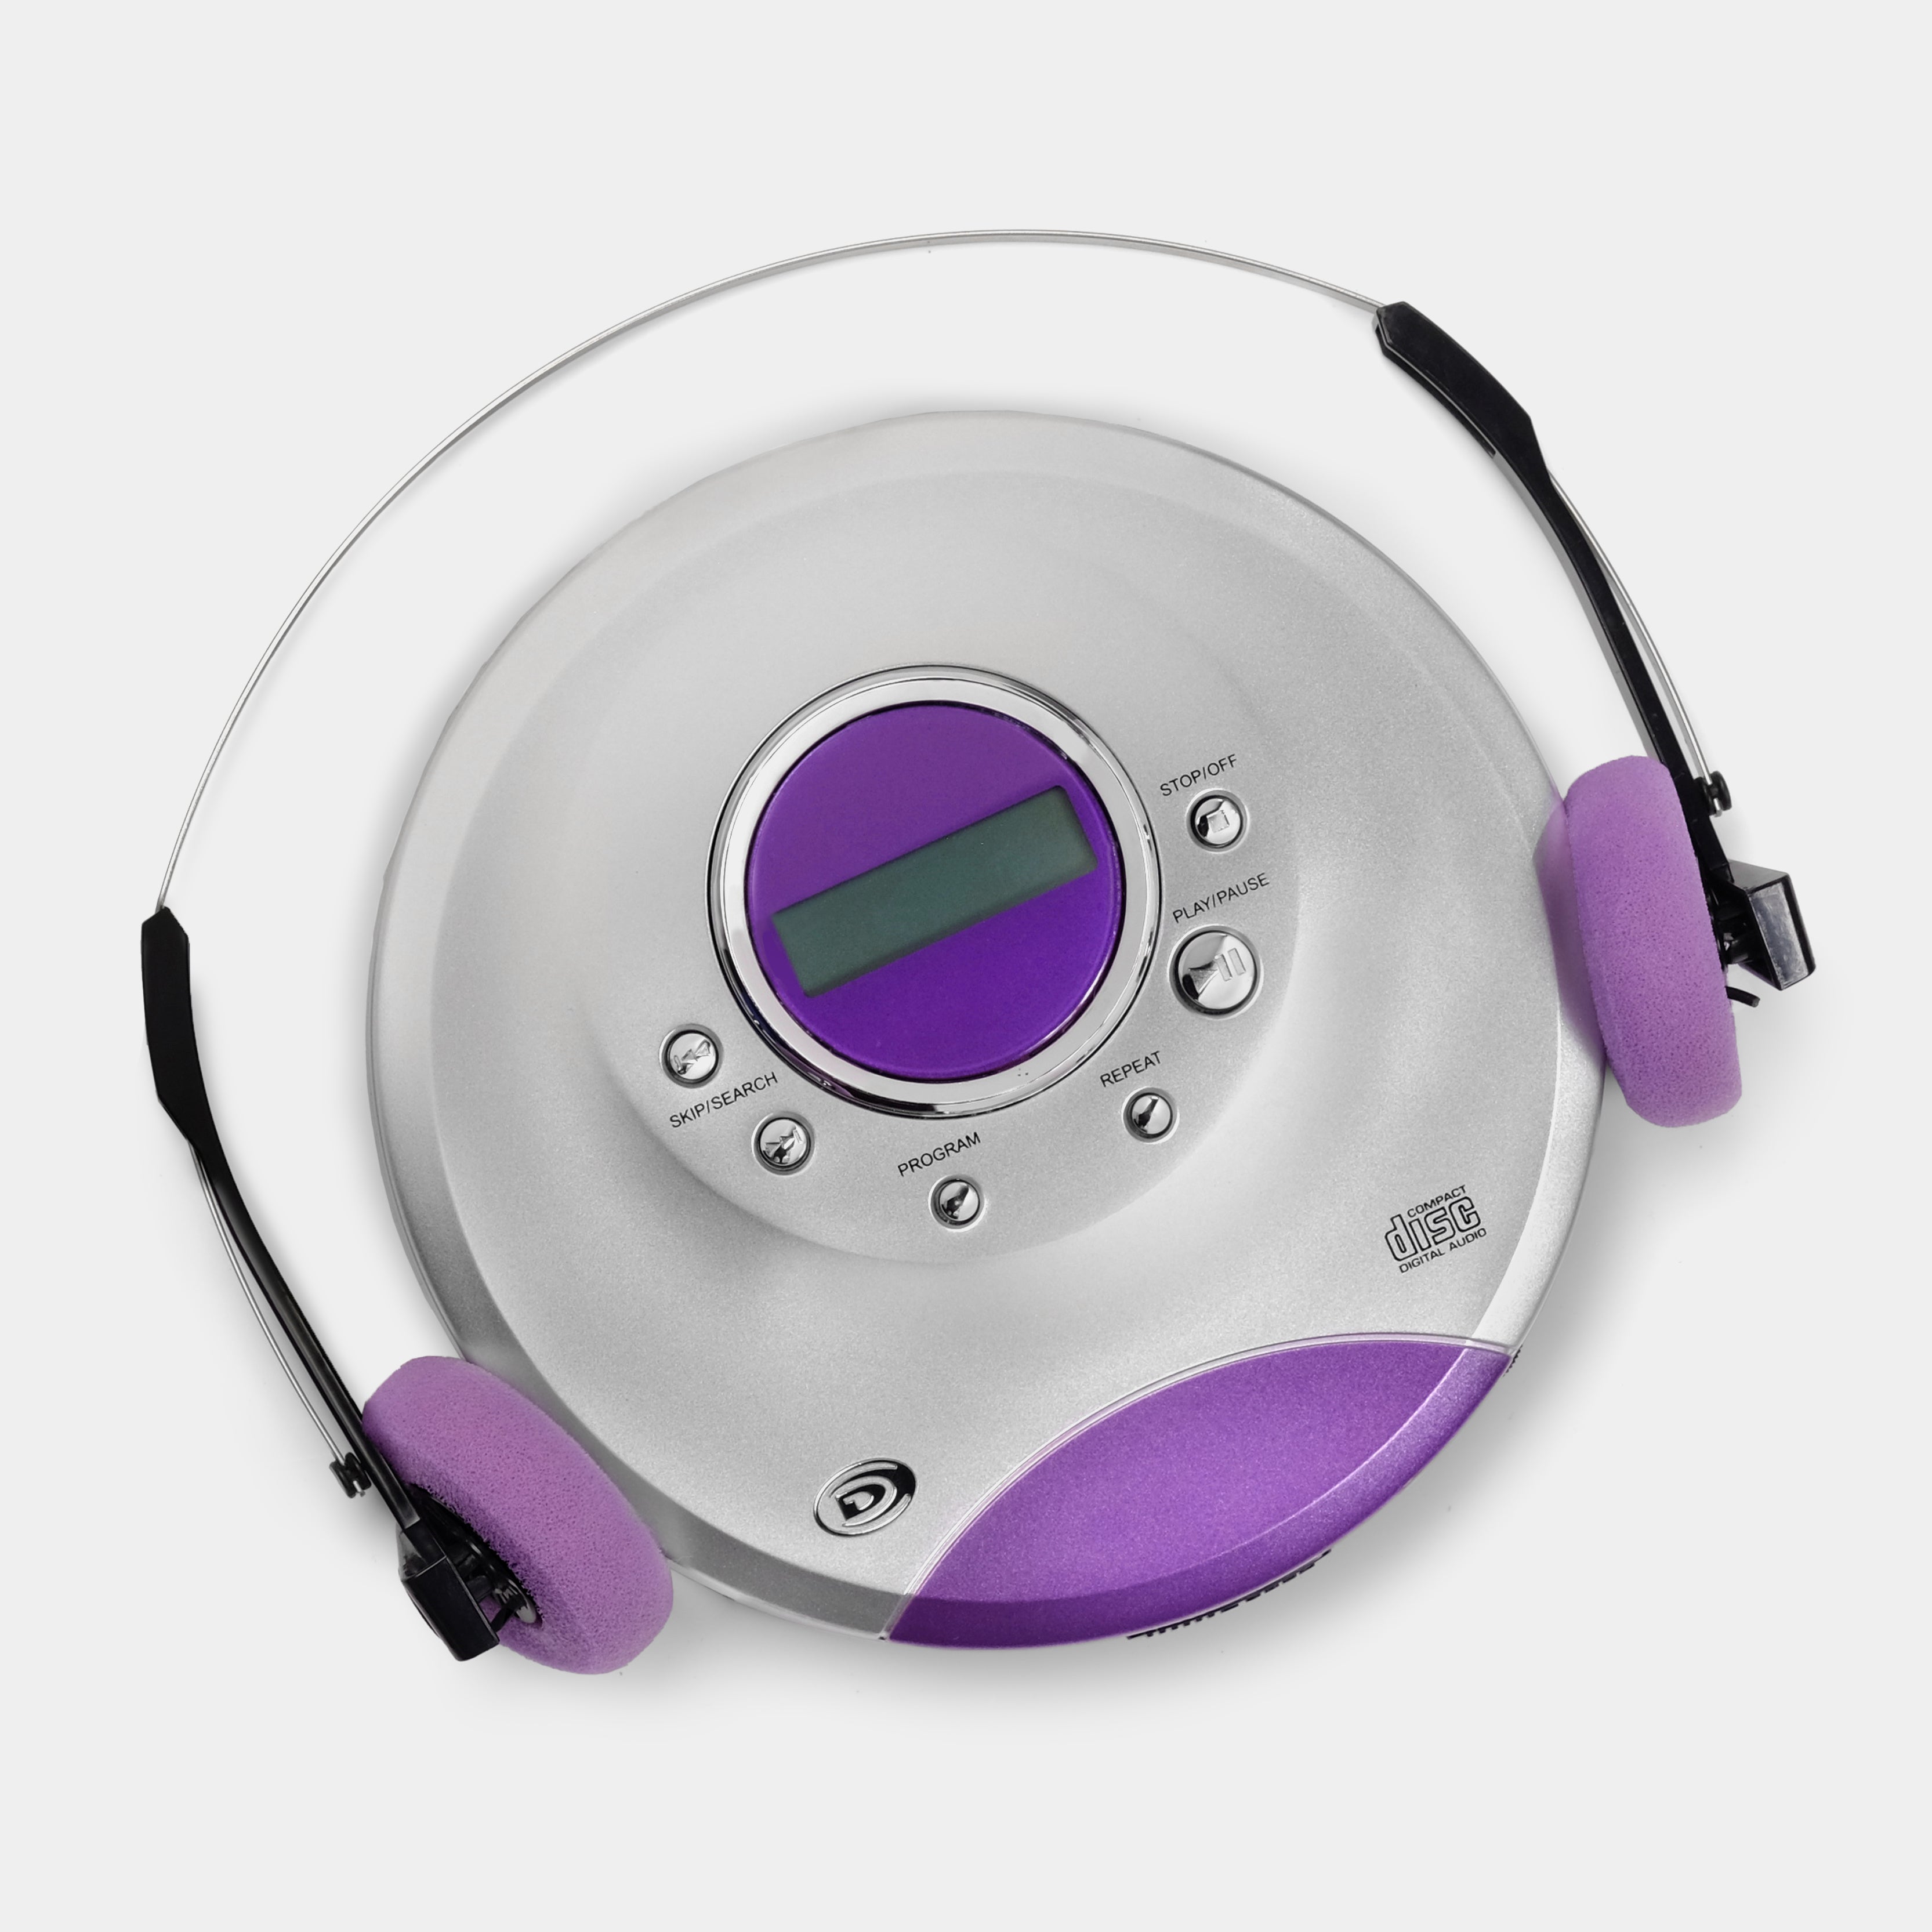 Round Style CD Player Portable Headset HiFi Music Reproductor CD